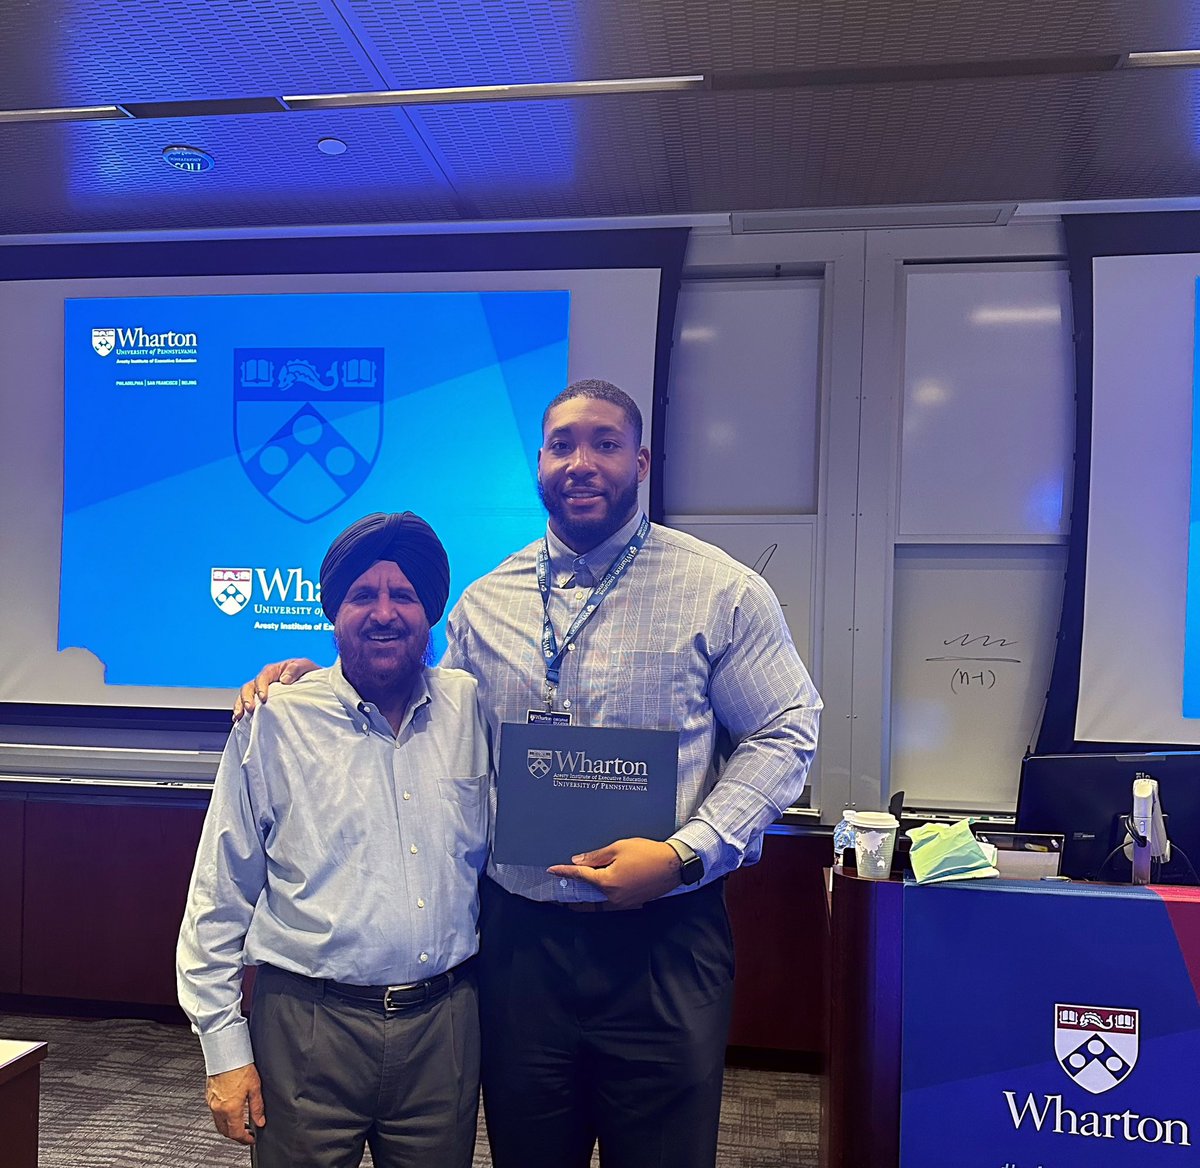 Grateful for the invaluable insights on strategic marketing and pricing I've gained from Professor Raju and many of my classmates at @Wharton I look forward to returning to campus to deepen my knowledge about the world of business.